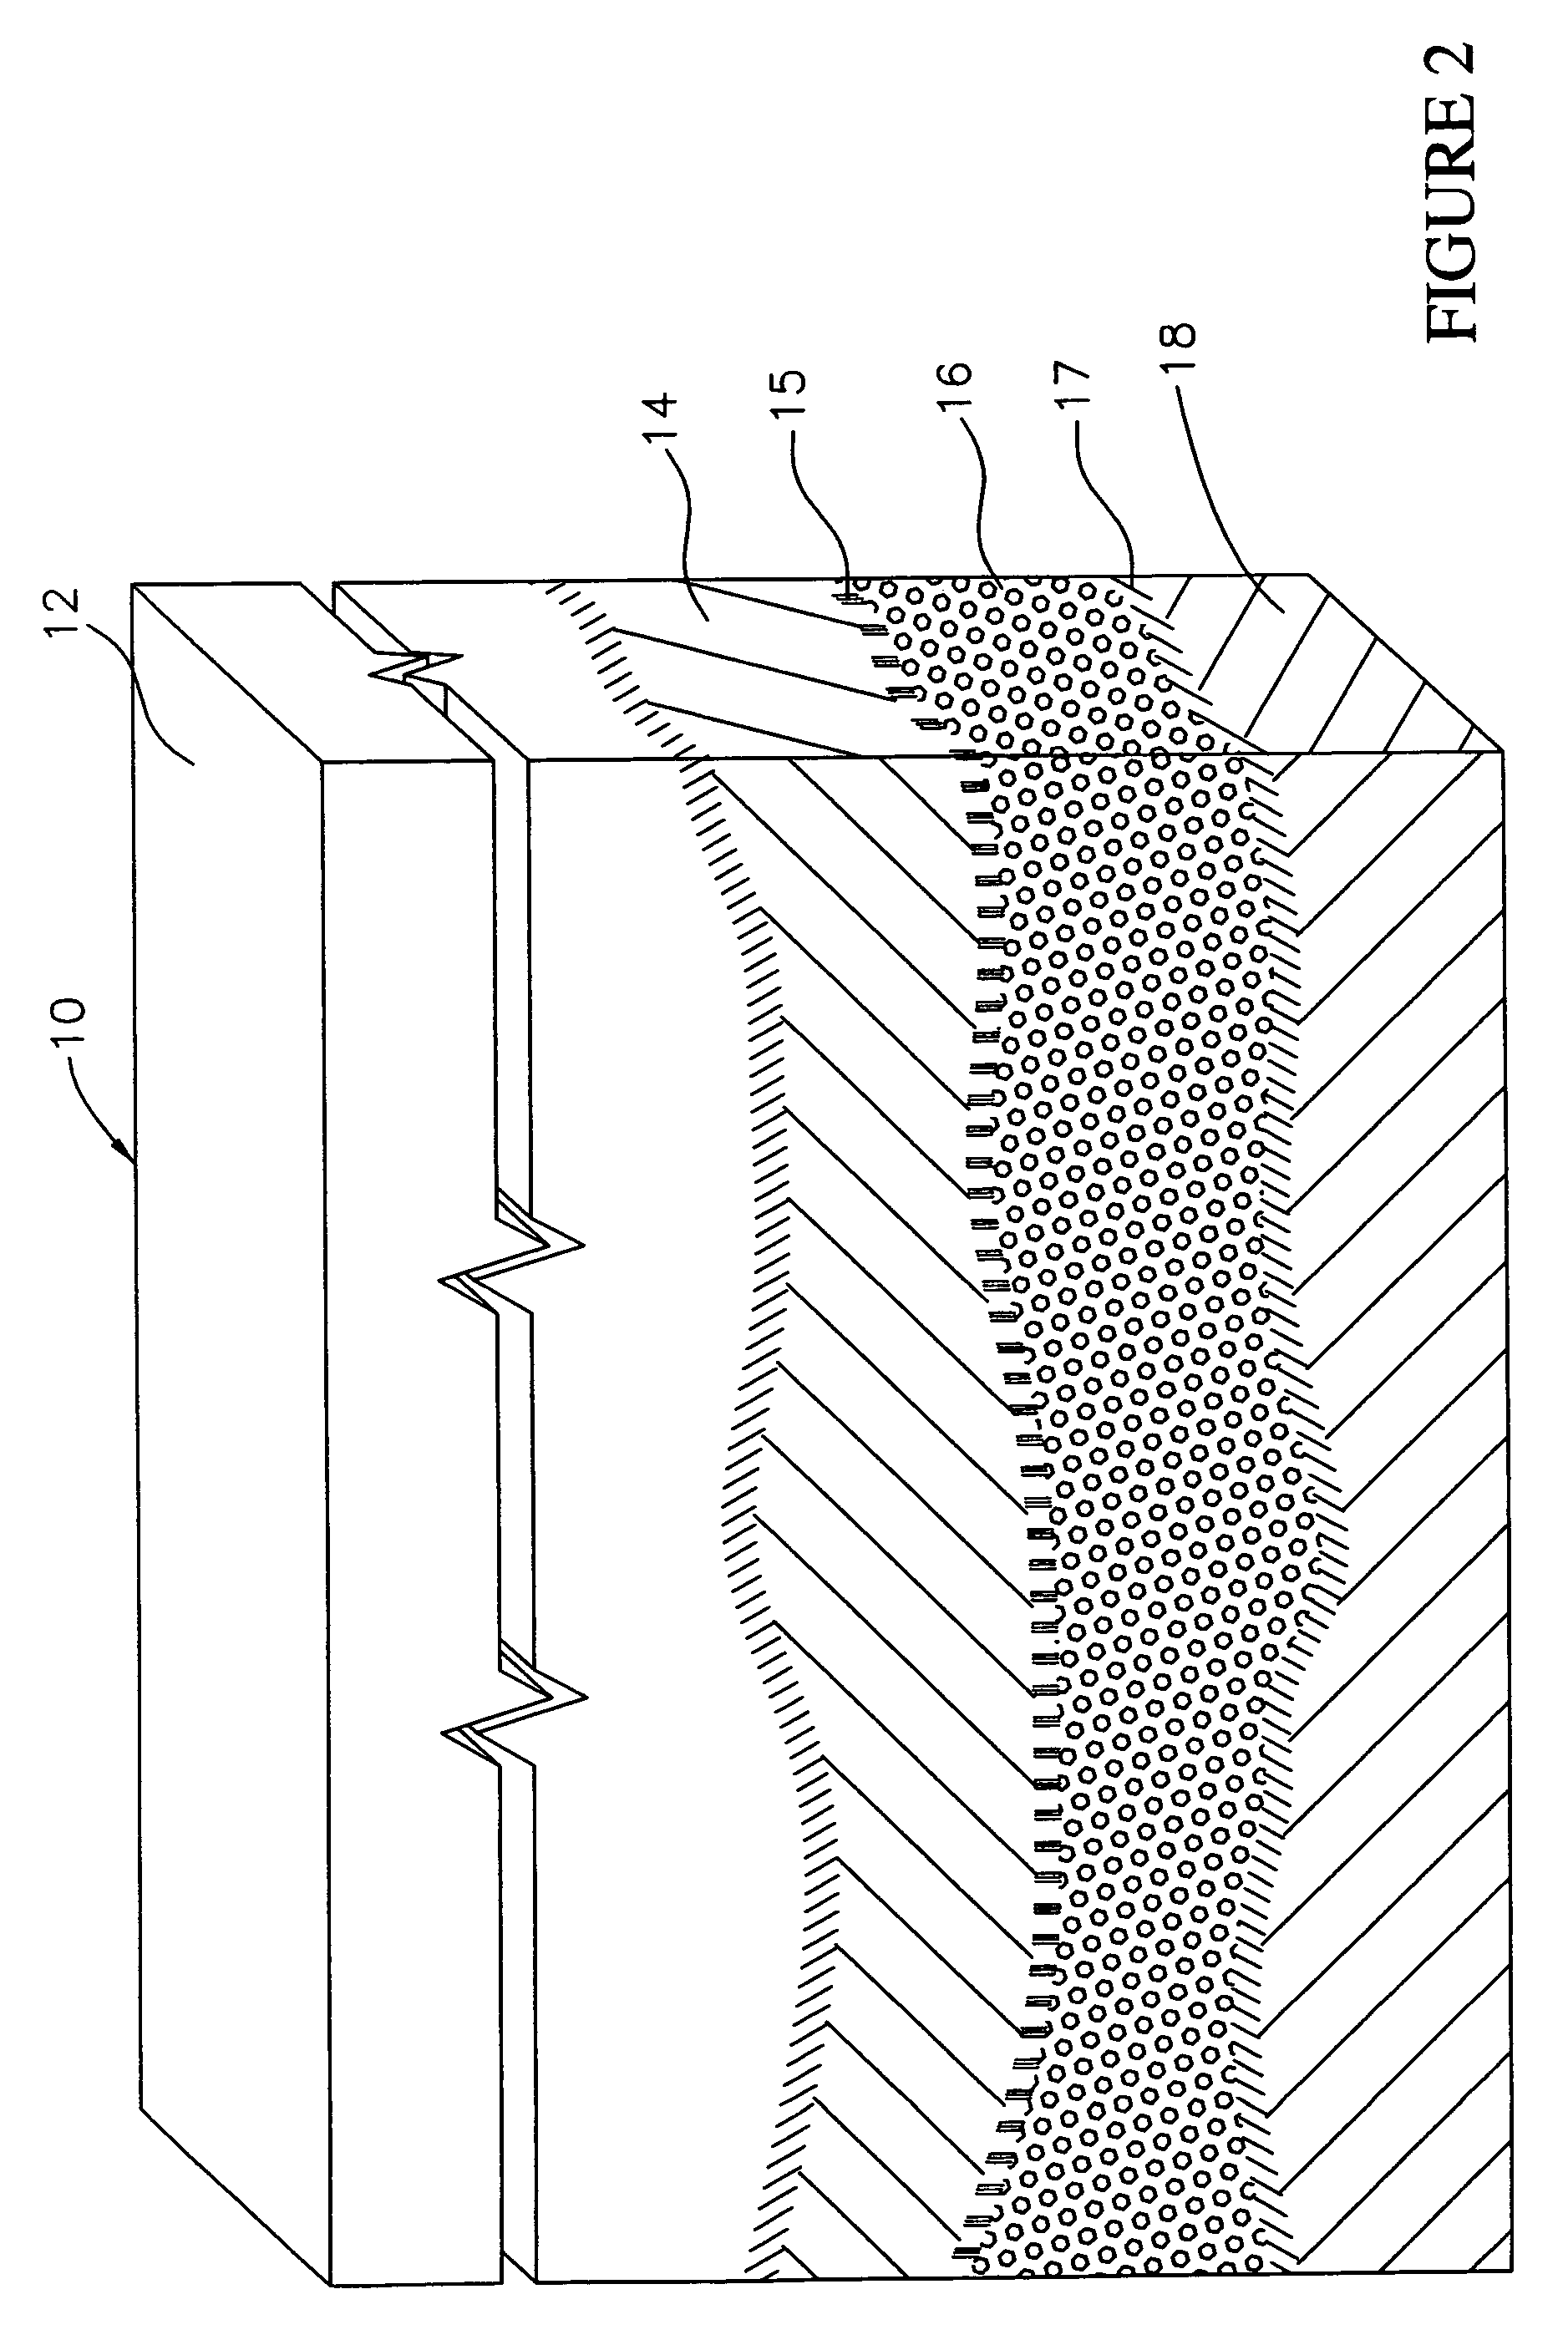 Method for predicting quantitative values of a rock or fluid property in a reservoir using seismic data